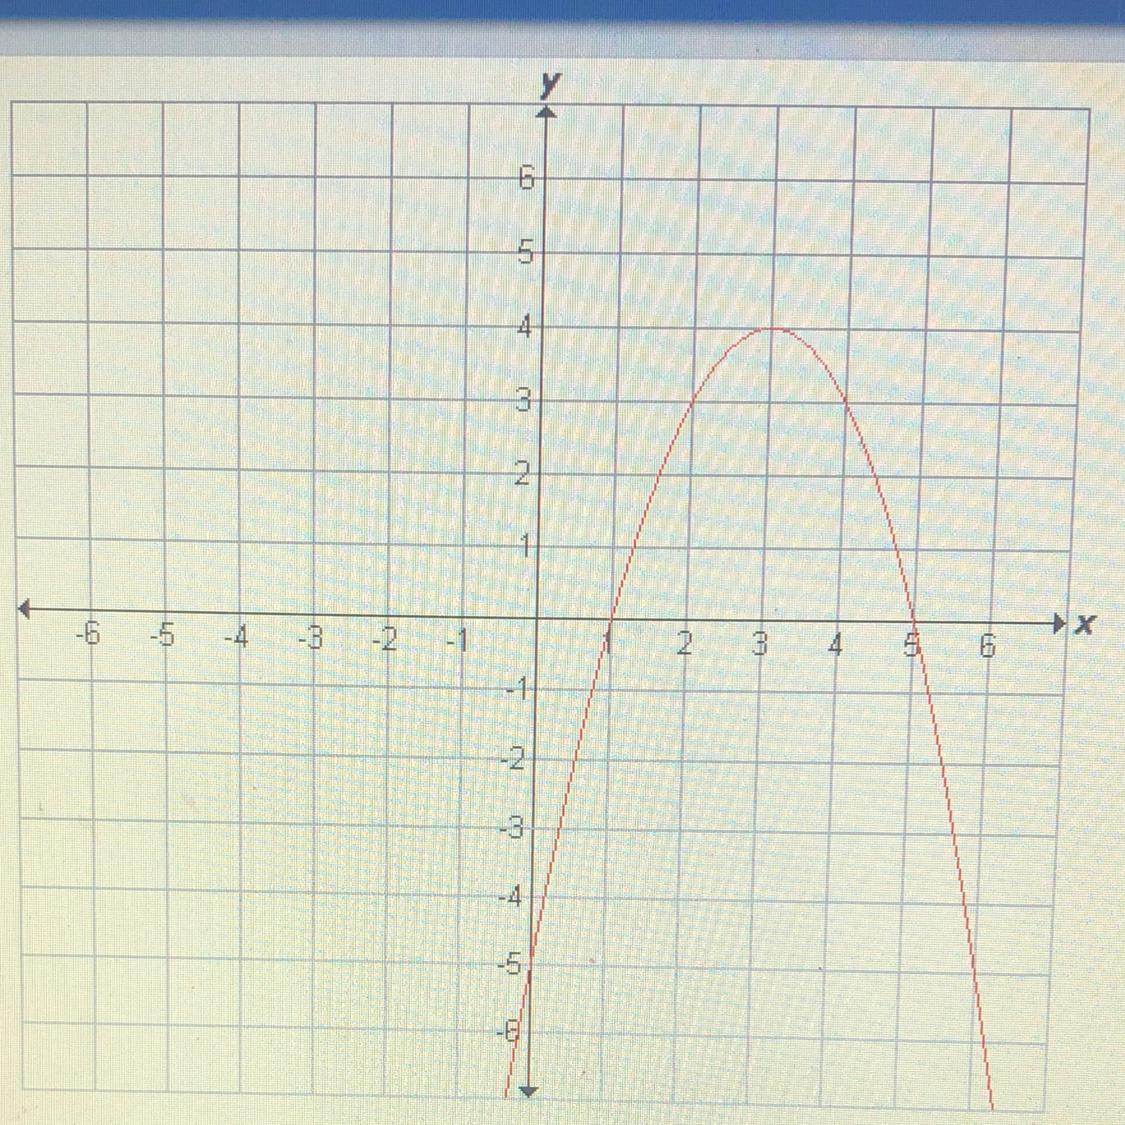 Identify The Axis Of Symmetry Of The Function Graphed Belowanswers:x=1, X=5, X=4, X=3